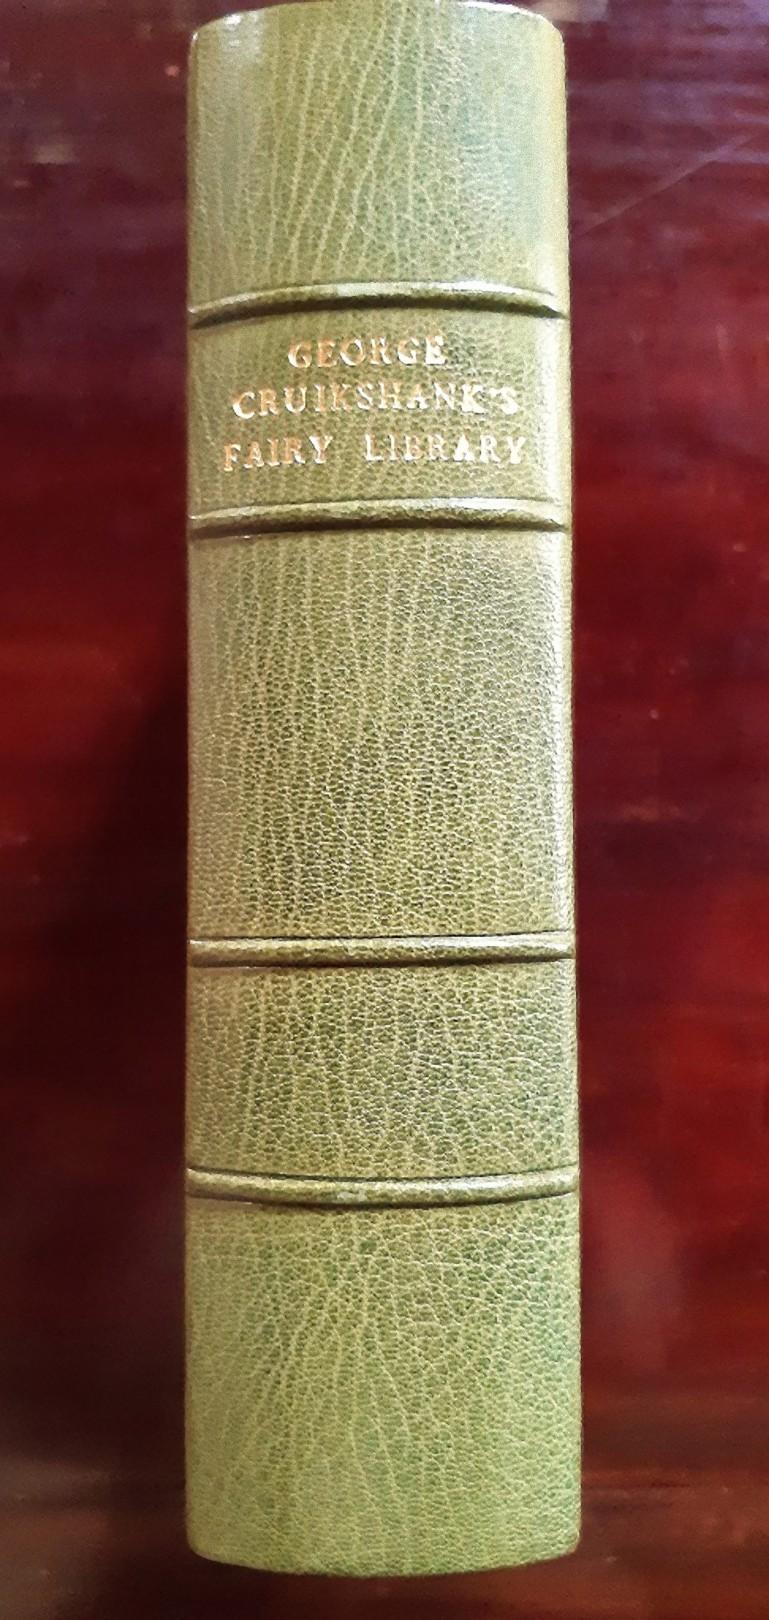 The Fairy Library - Rare Book Illustrated by George Cruikshank - 1850 For Sale 3